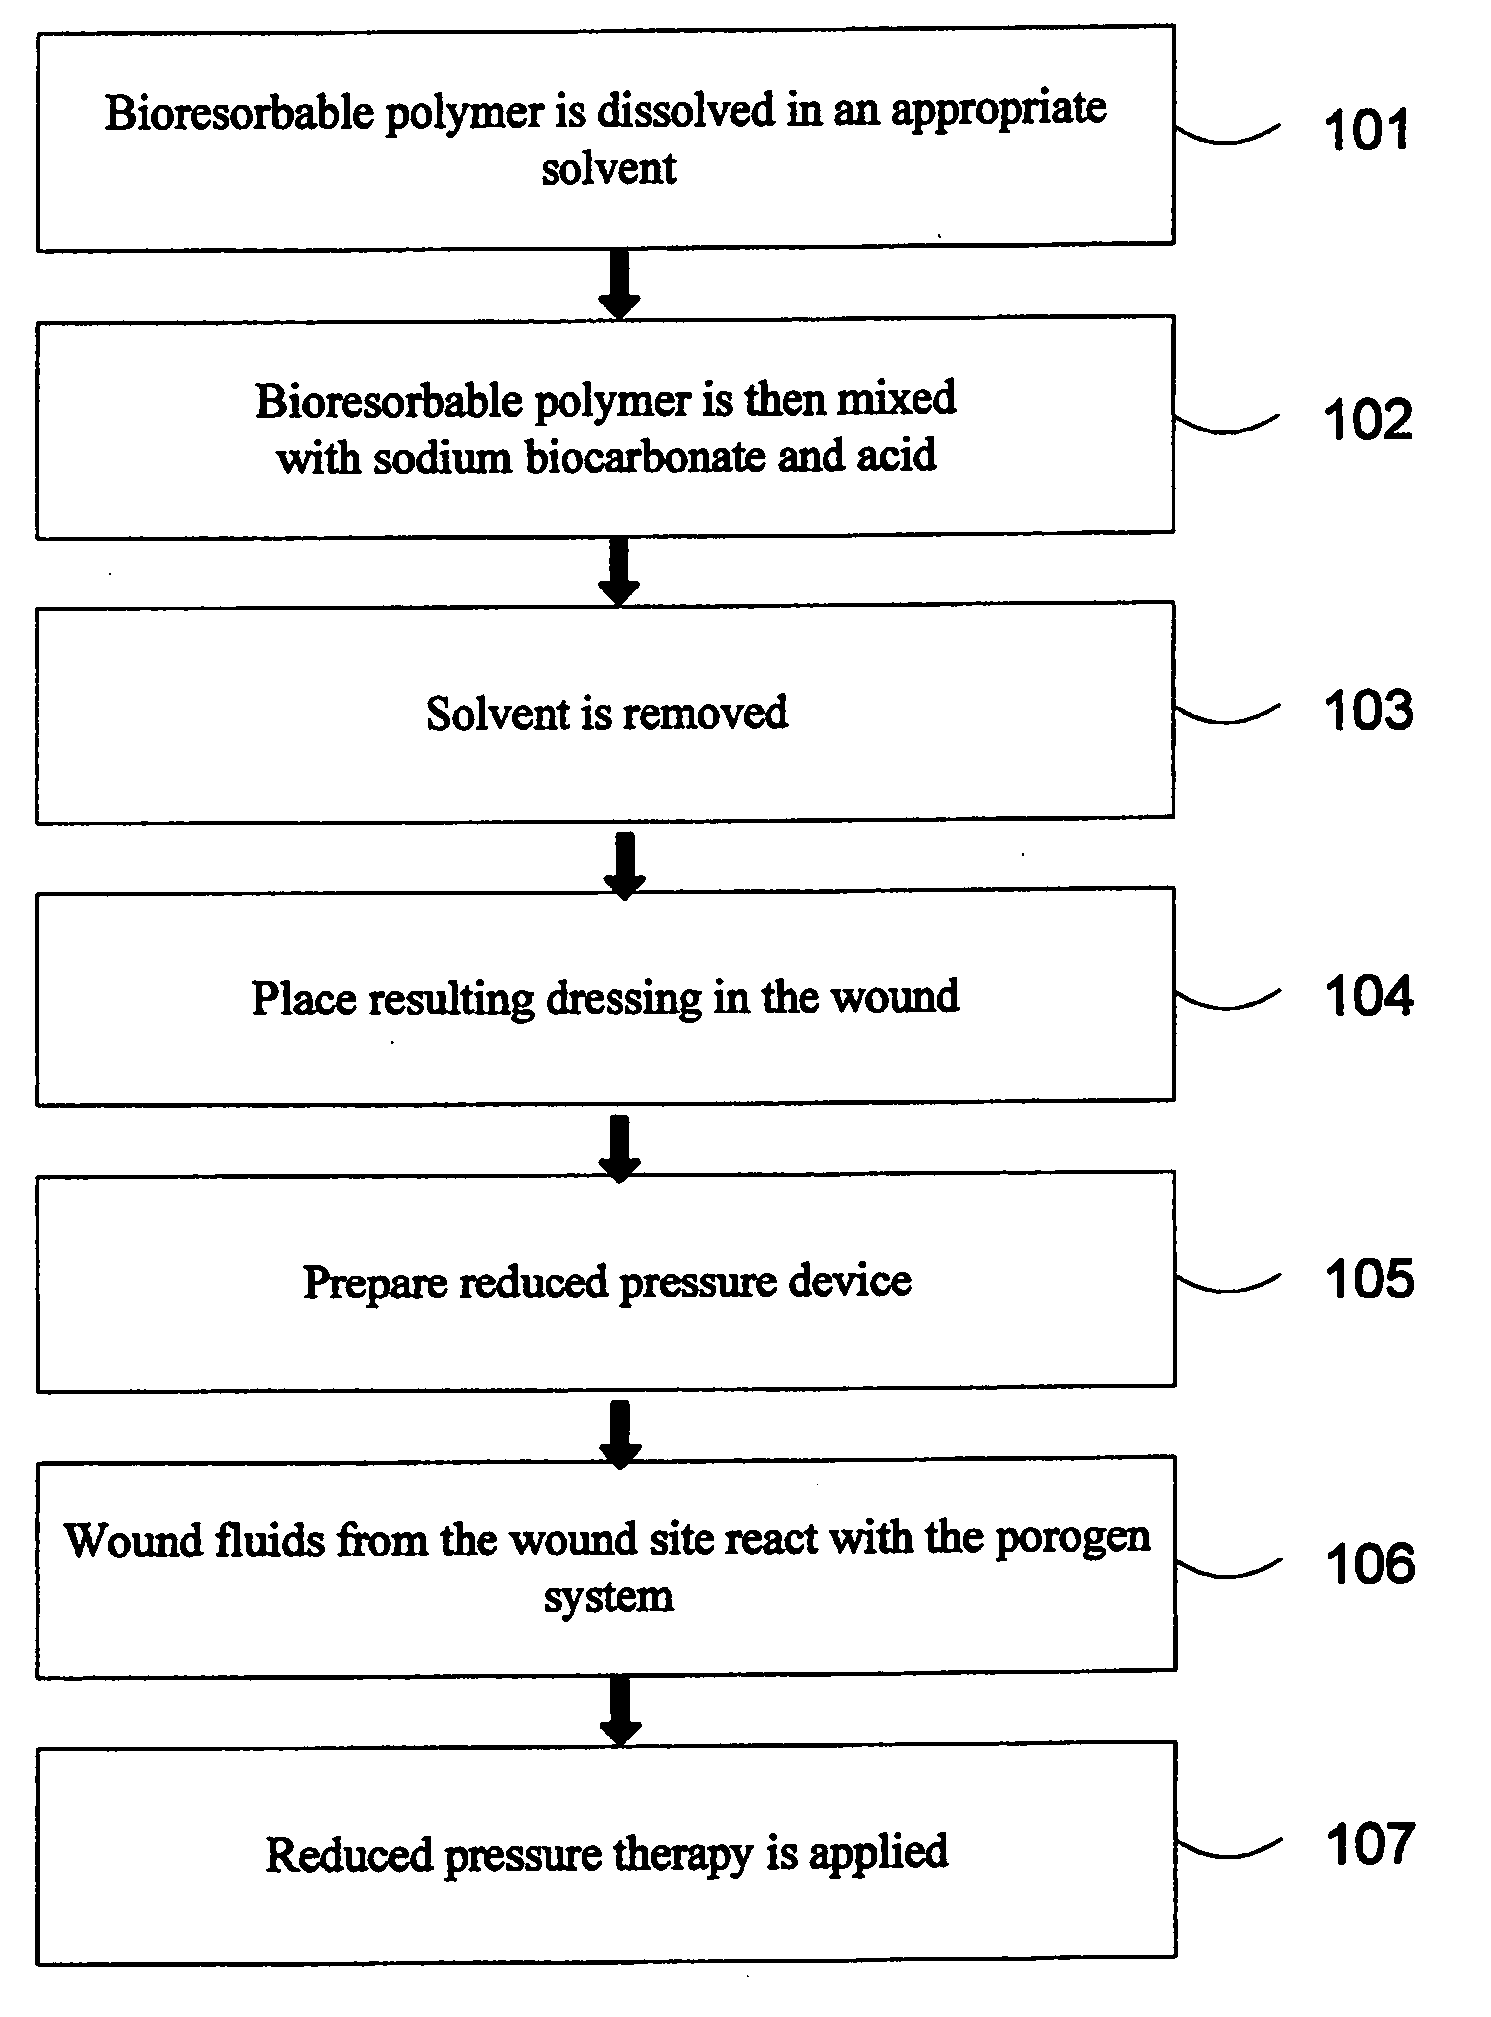 Porous bioresorbable dressing conformable to a wound and methods of making same